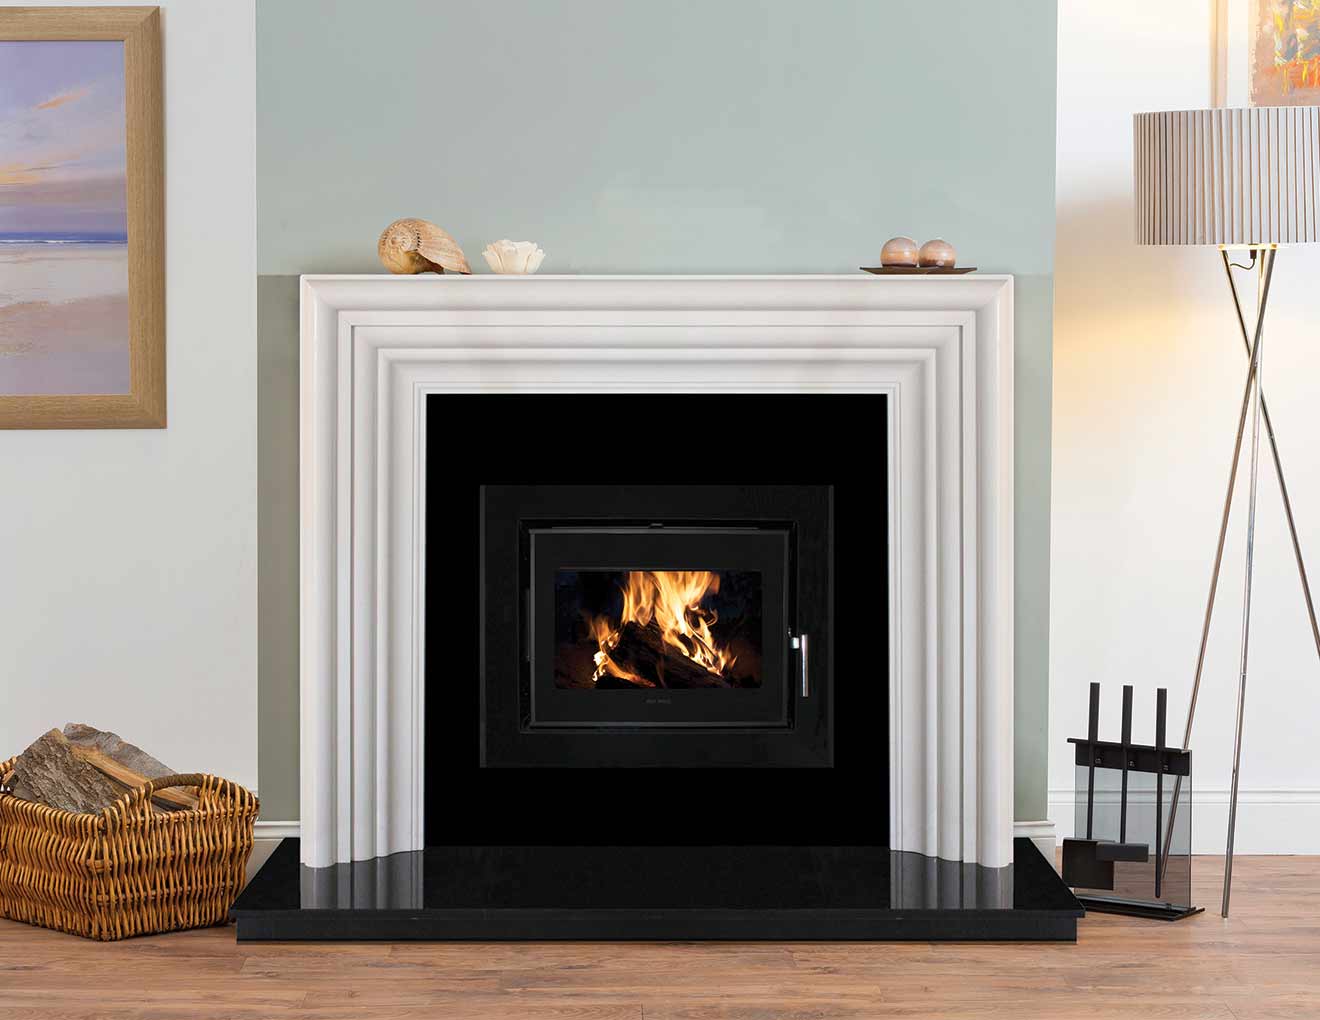 How to Heat Your House with A Fireplace Awesome Cassette Stoves Wood Burning & Multi Fuel Dublin